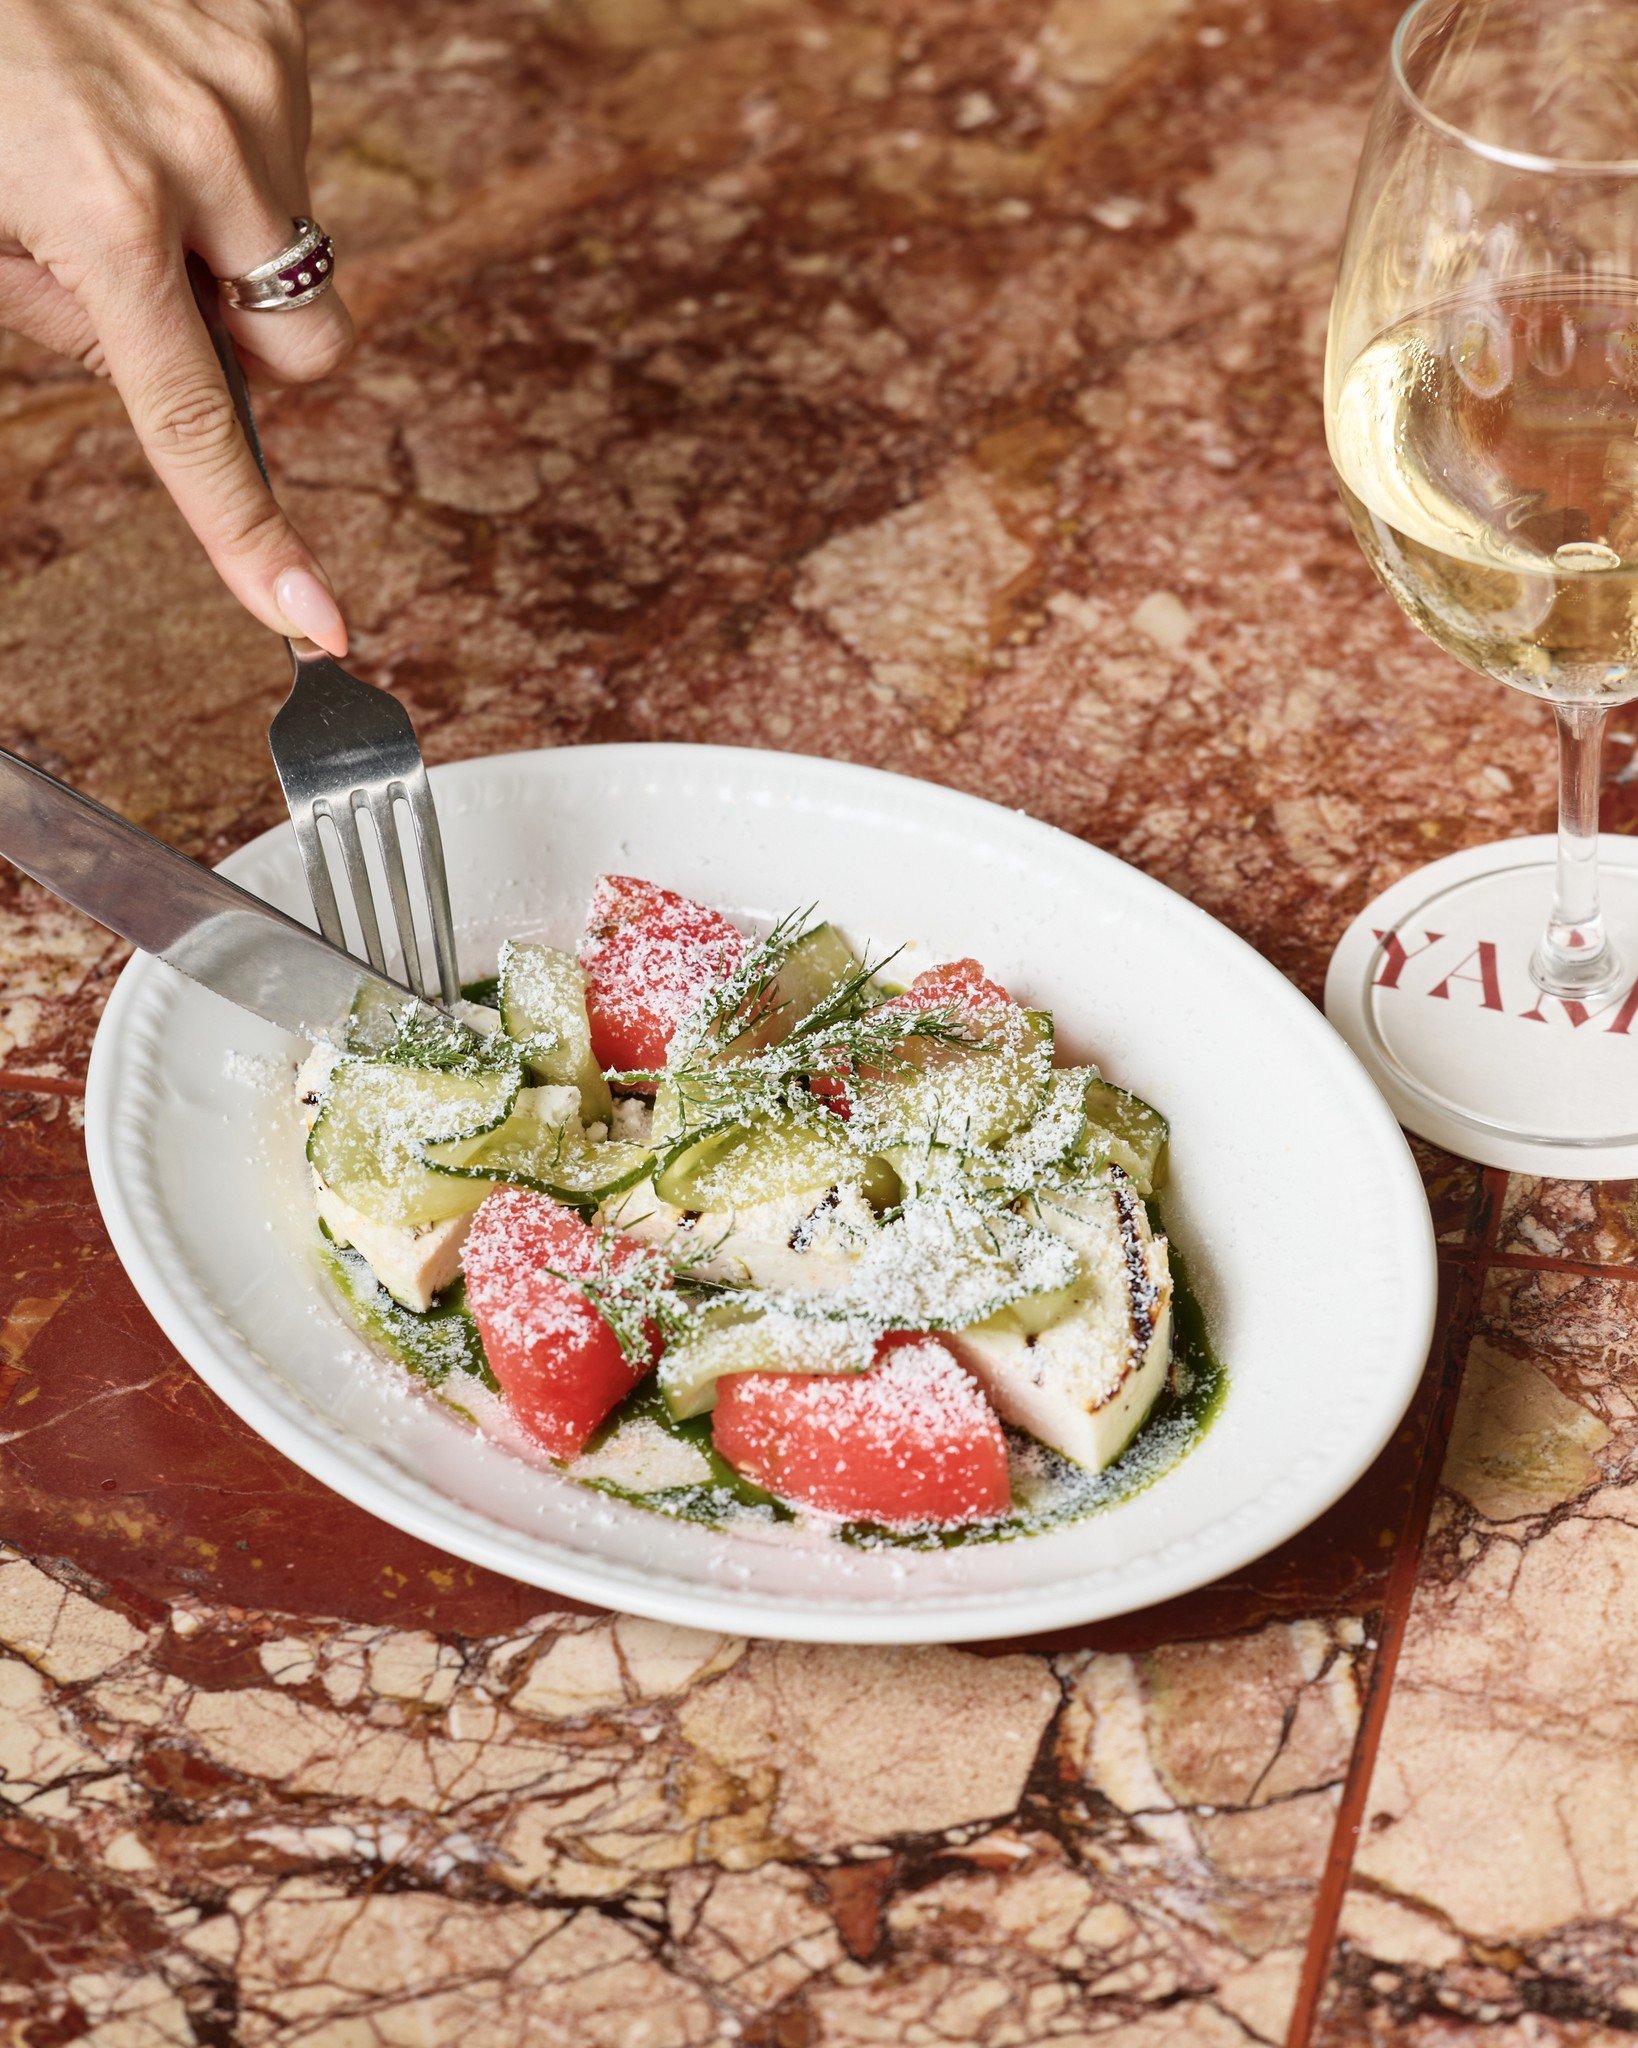 Have you tried our new watermelon salata? Served with fresh mint, cucumber and grilled manouri cheese 🍉 Super refreshing and delicate

www.yamasrestaurant.com.au/bookings to reserve your table or call us on (07) 2101 5000
45 Mollison St, West End QL